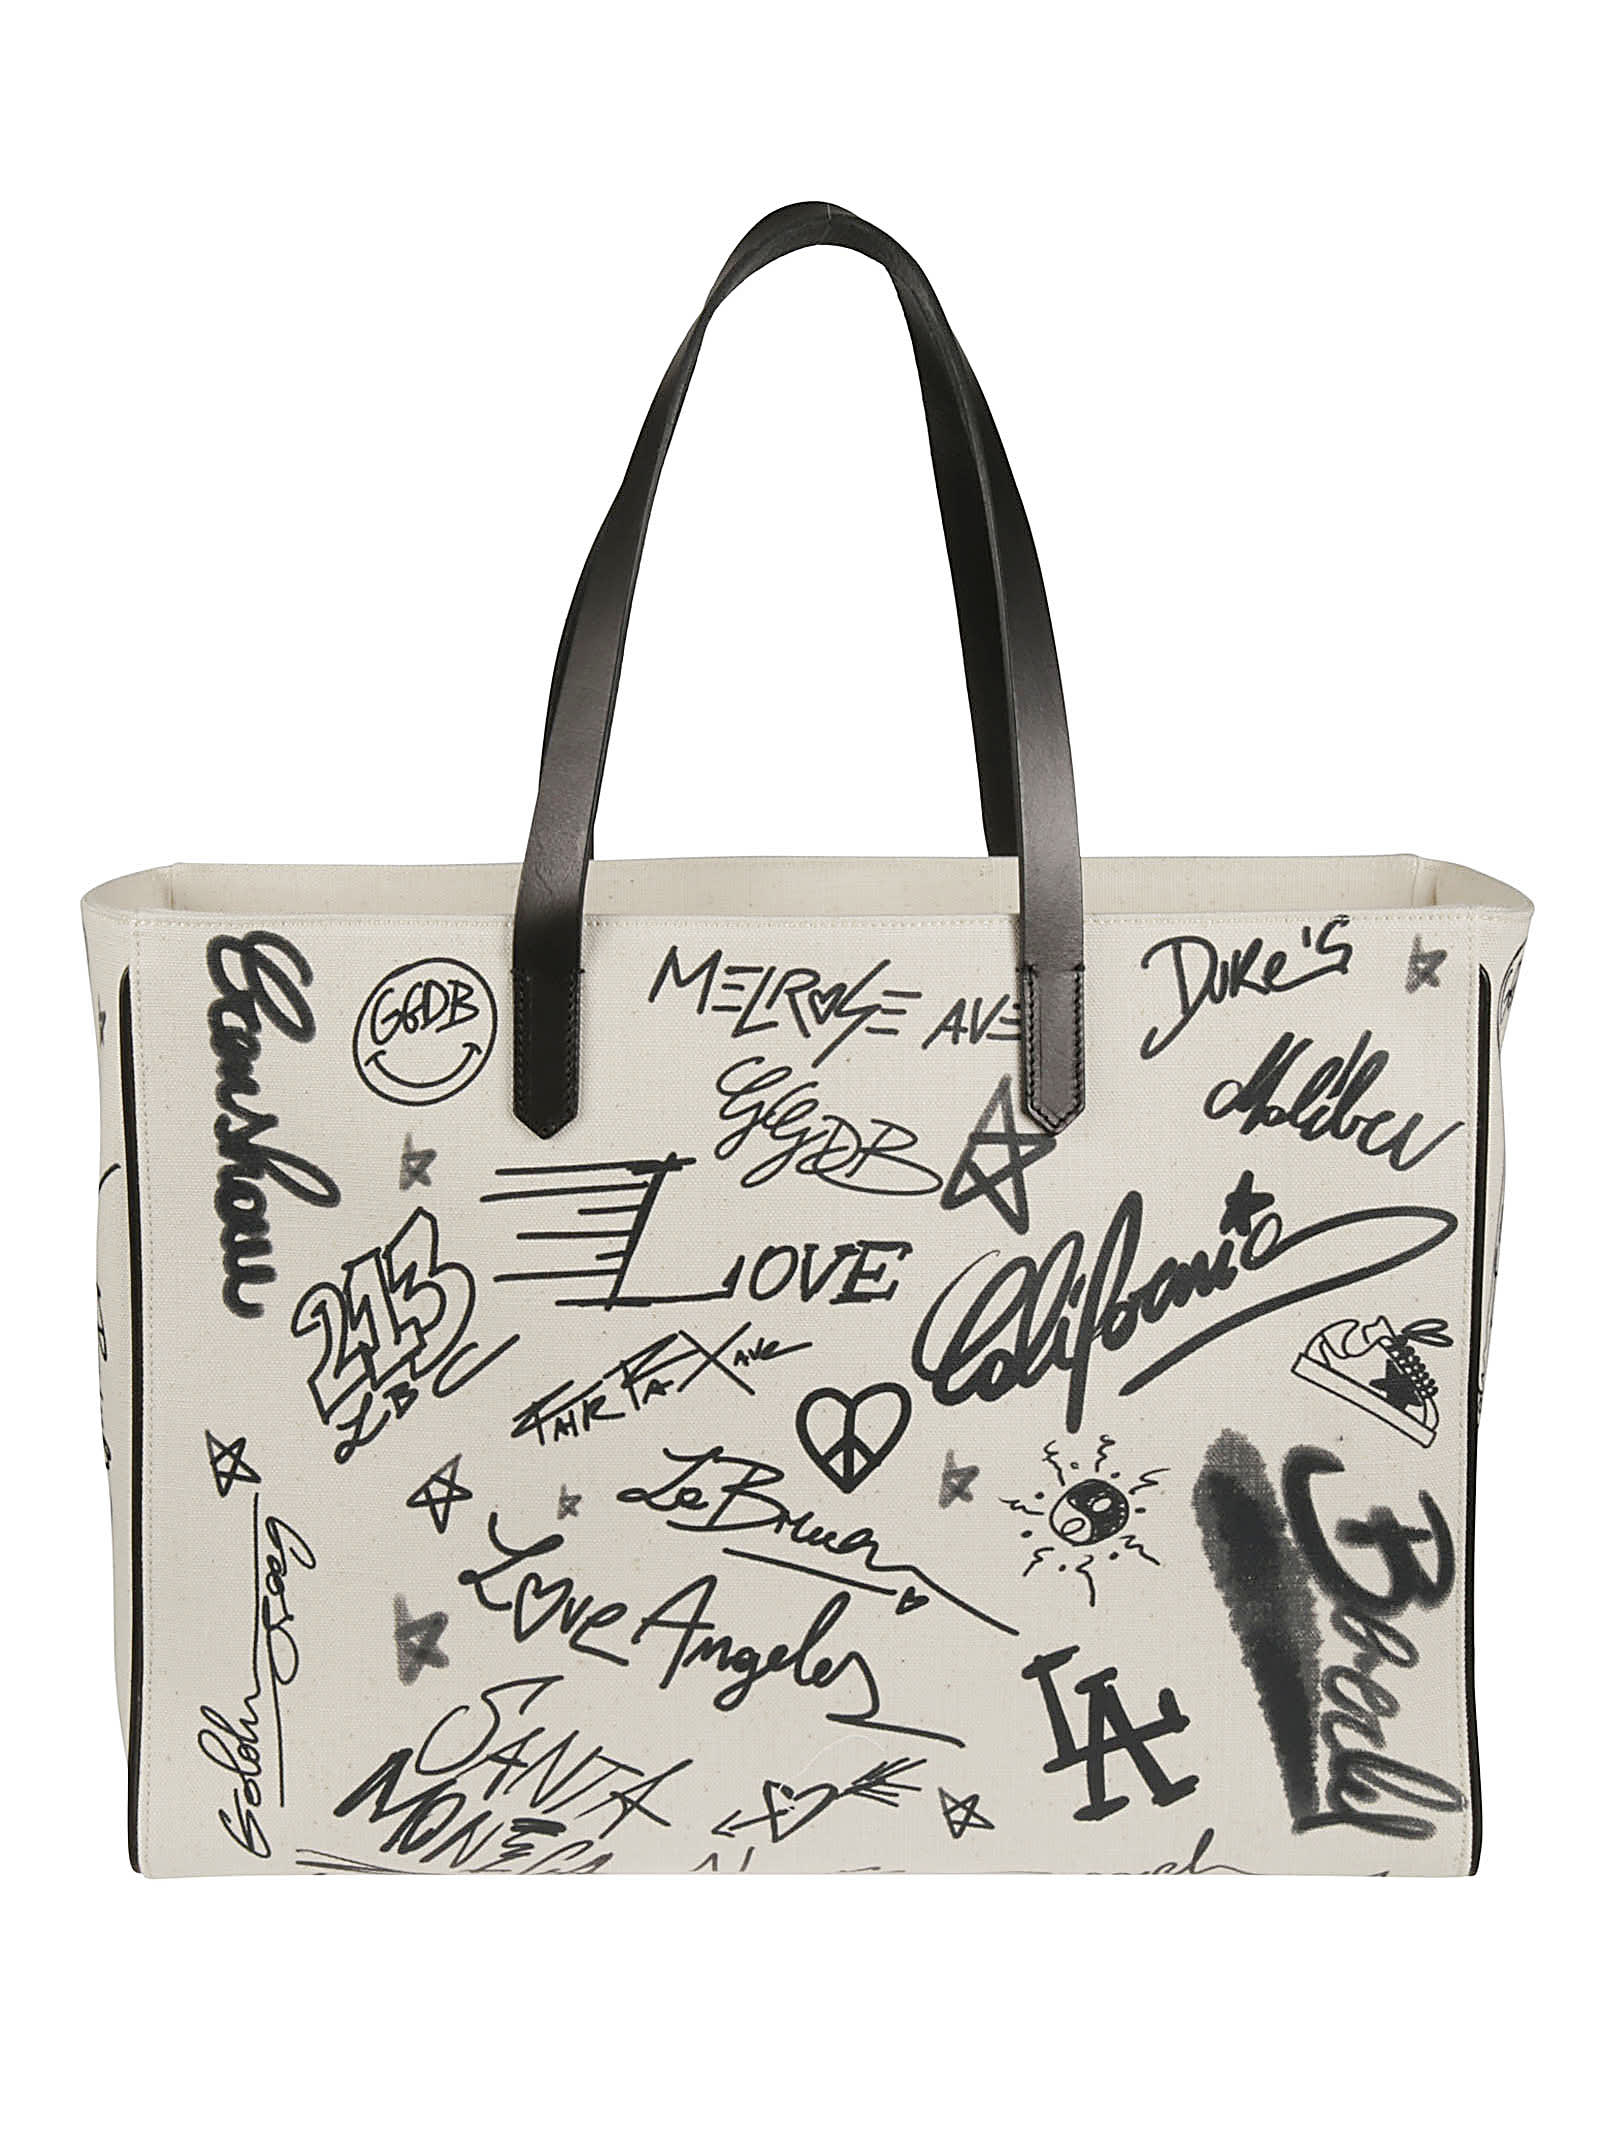 GOLDEN GOOSE TOTE,GWA00116 A000104 10283